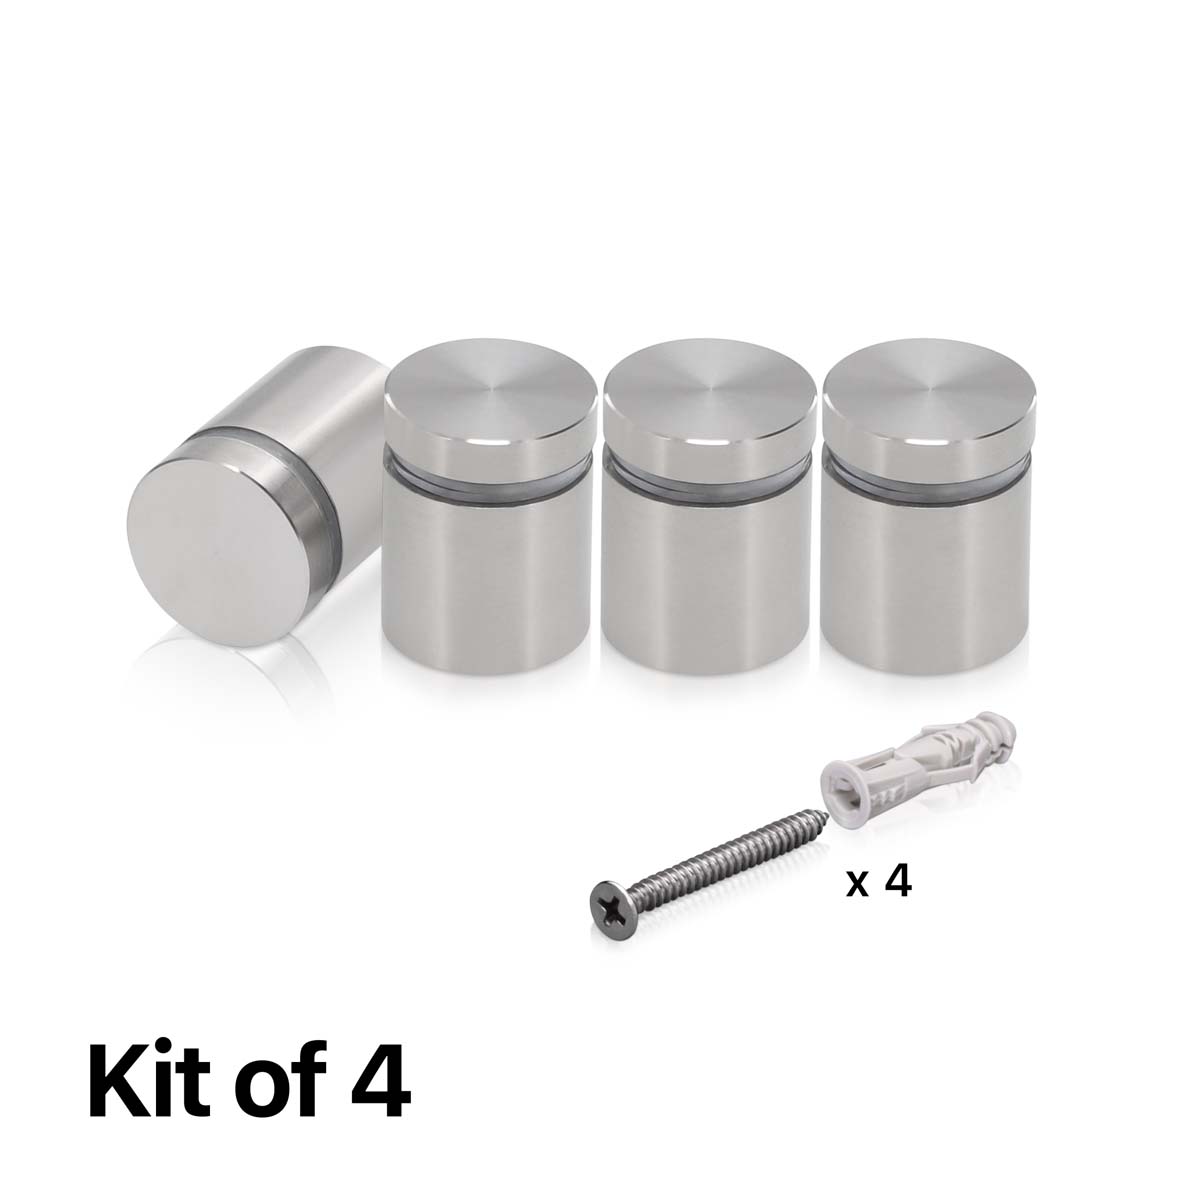 (Set of 4) 7/8'' Diameter X 3/4'' Barrel Length, Hollow Stainless Steel Brushed Finish. Easy Fasten Standoff with (4) 2216Z Screws and (4) LANC1 Anchors for concrete or drywall (For Inside Use Only) [Required Material Hole Size: 7/16'']